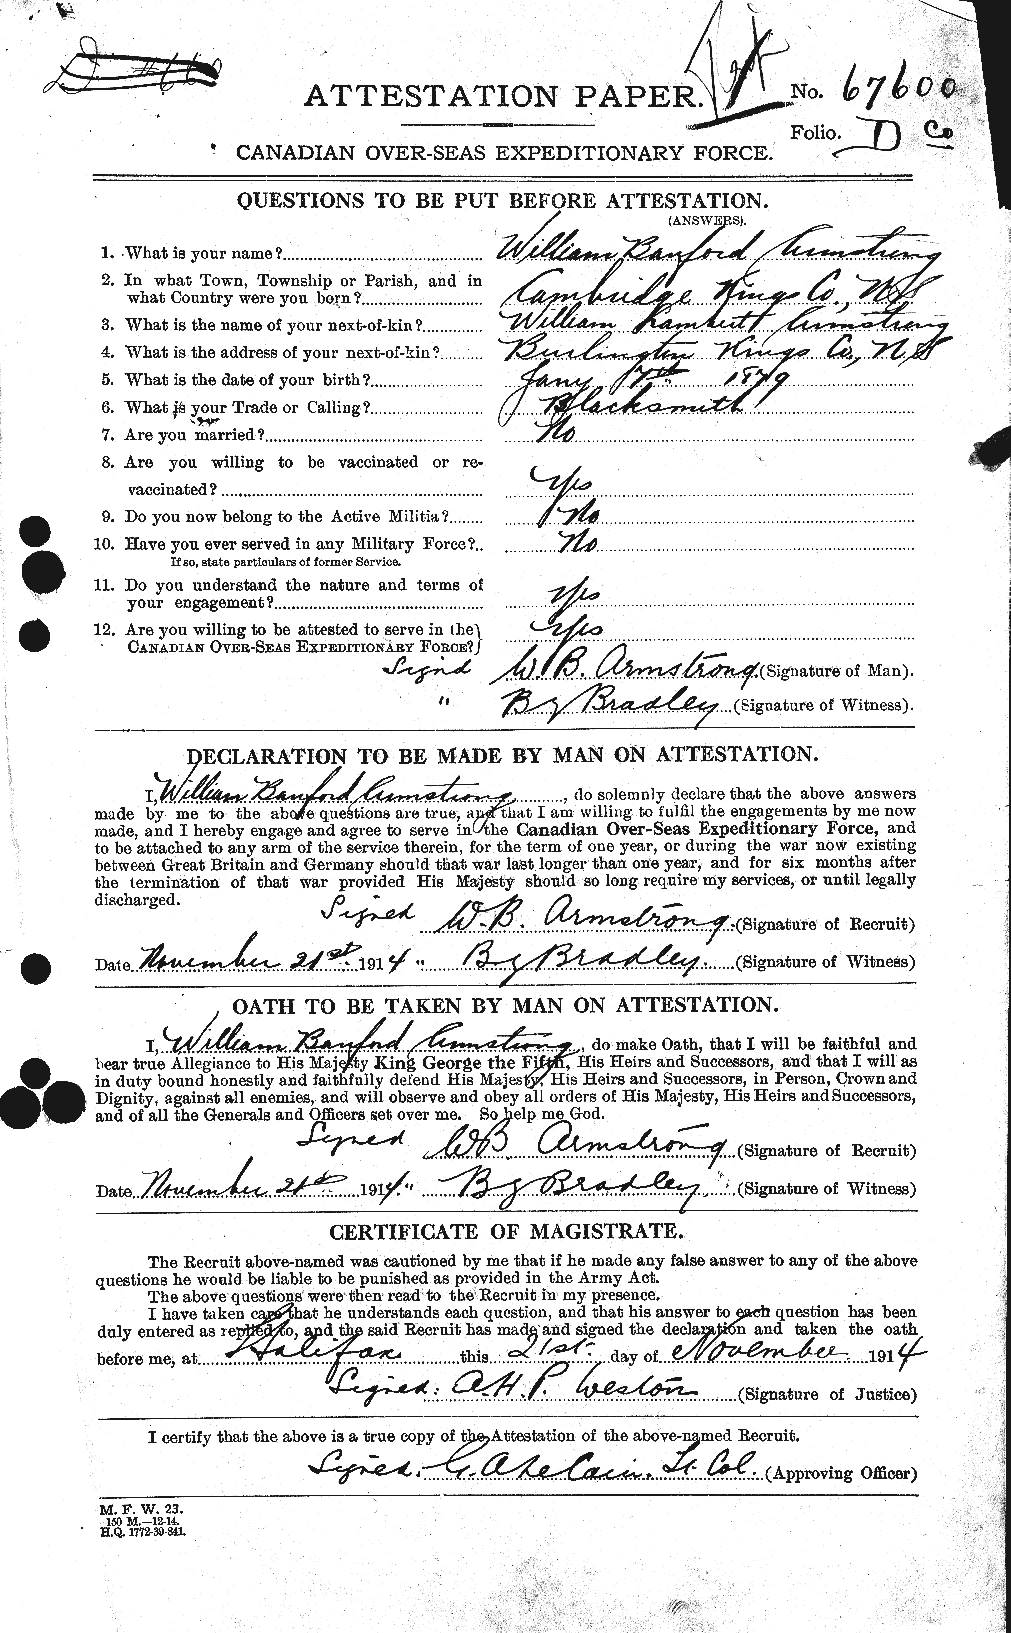 Personnel Records of the First World War - CEF 216704a